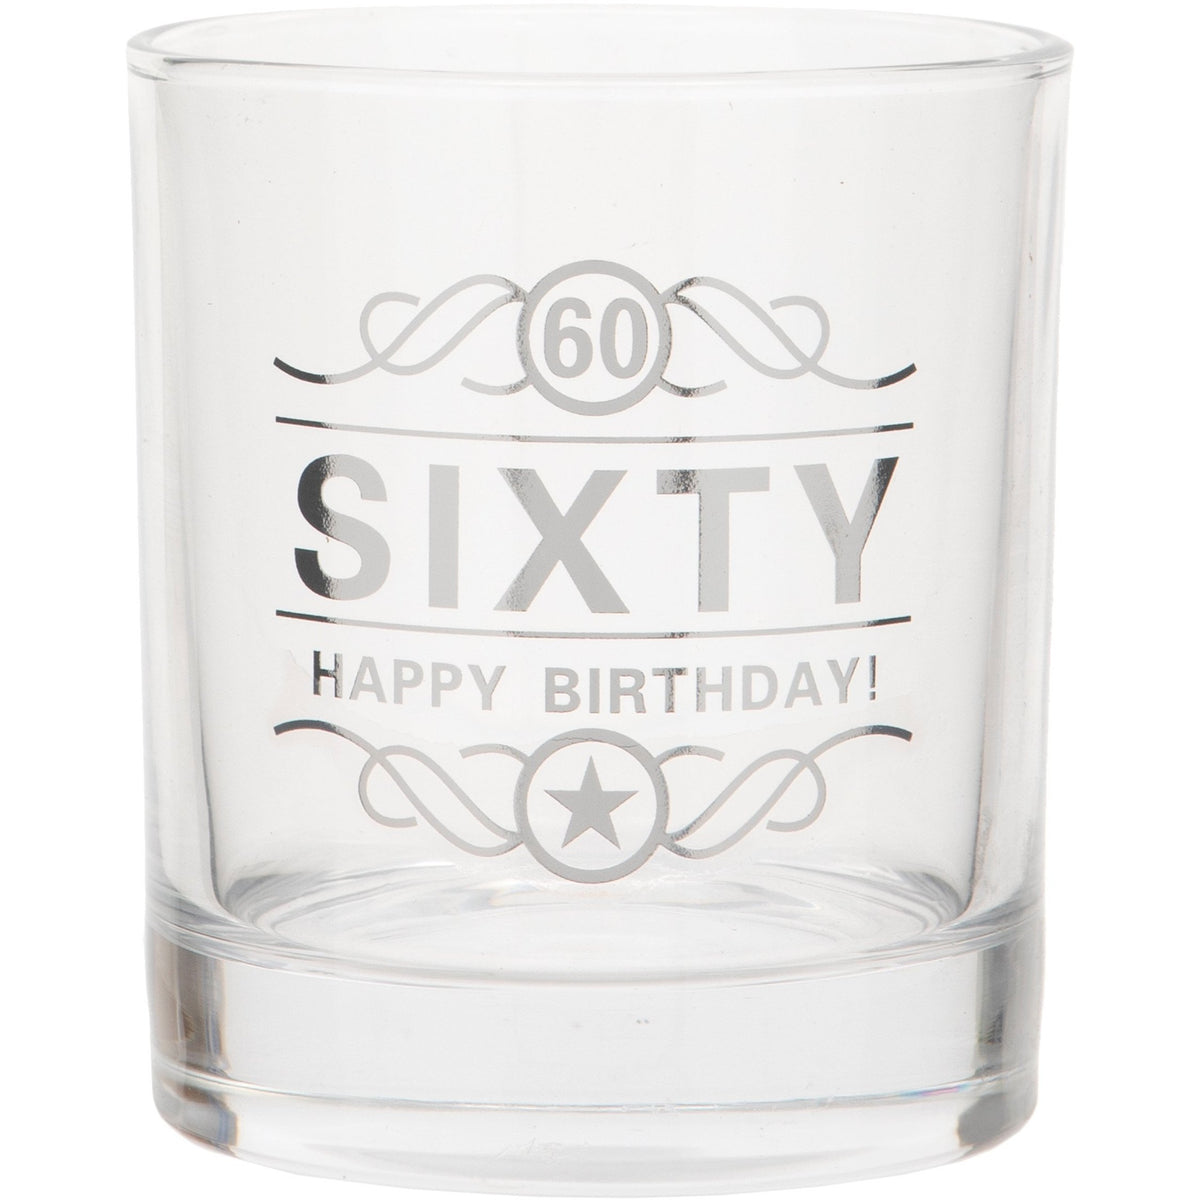 Whisky Glass for Birthday - 60th